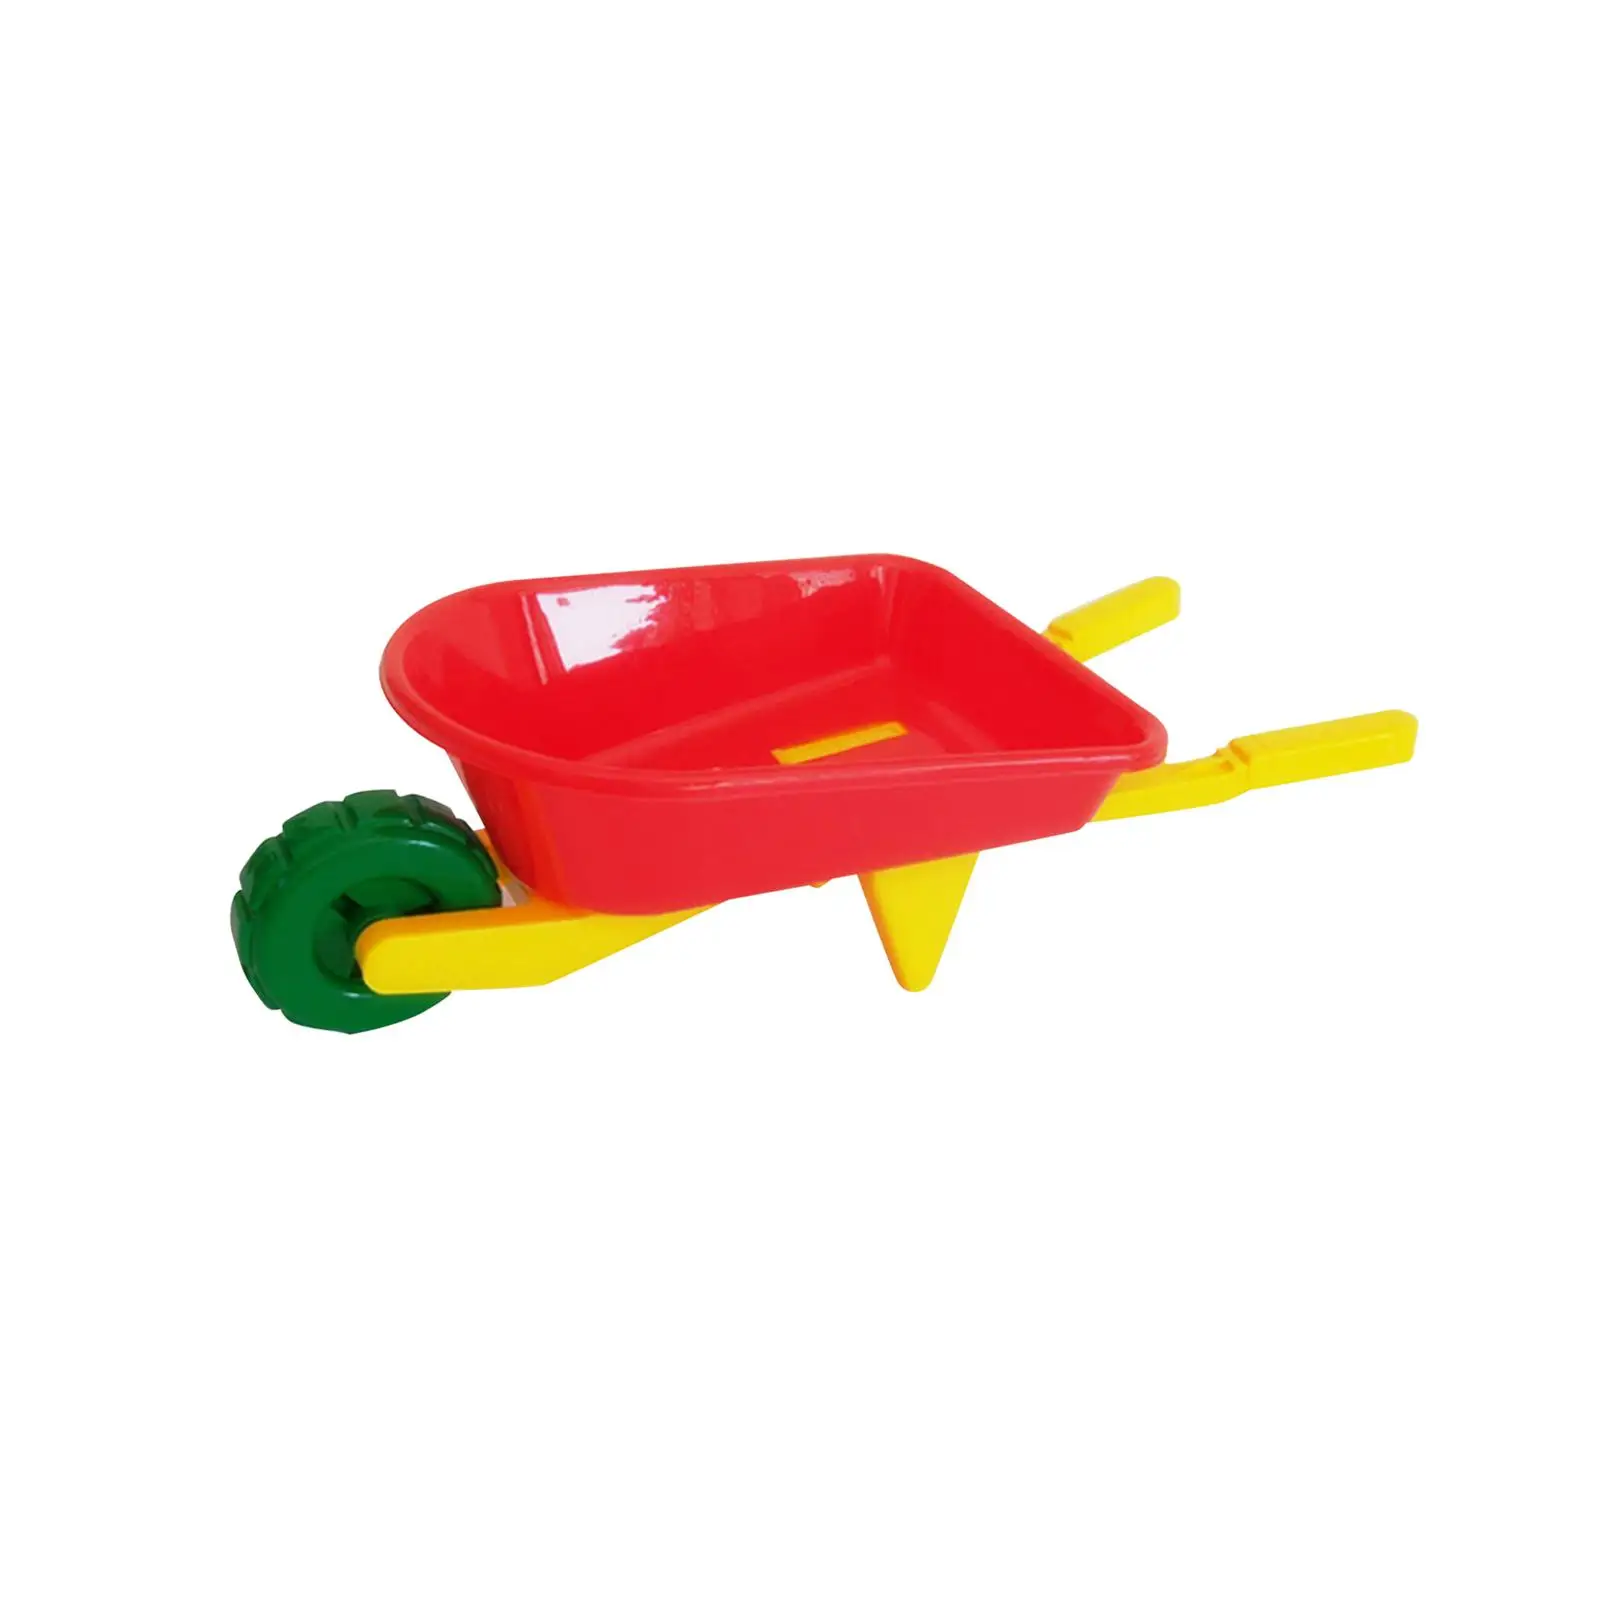 Sand Wheelbarrow Kids Play Sand Easy to Carry Sandpit Toys with Single Wheel for Kids Gardening Ages 2 Years Old up Children